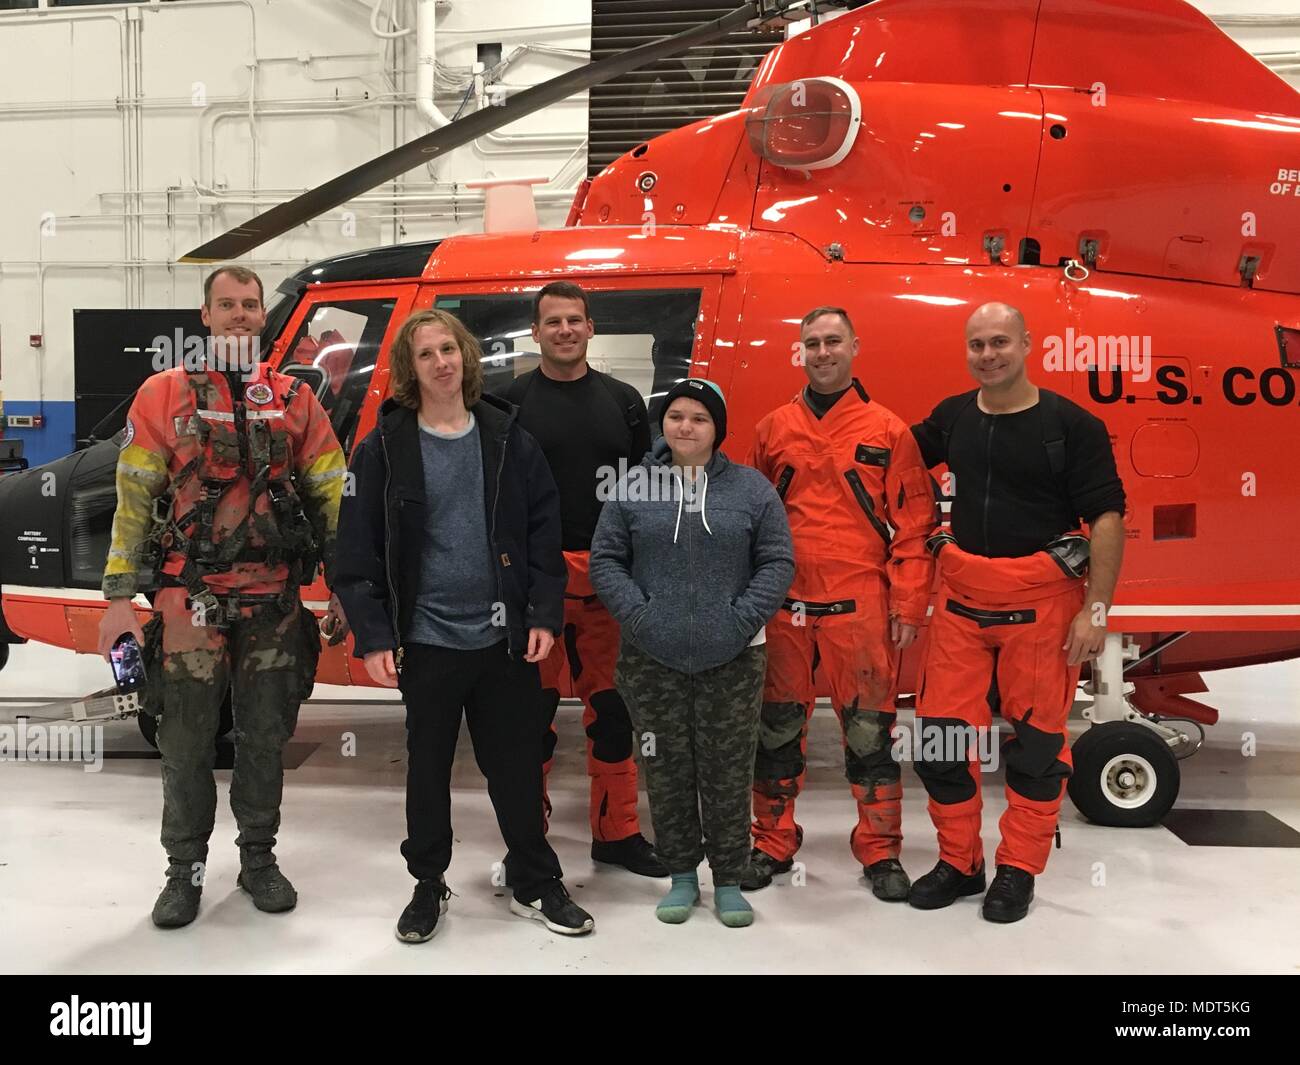 An MH-65 Dolphin helicopter crew from Coast Guard Air Station San Francisco stands for a photo with two boaters they rescued near Alviso, California, Dec. 3, 2017. The Coast Guard was called to assist when two of the three boaters requested to be removed from an aground boat due to concerns for hypothermia while the third person waited for high tide to refloat the boat. (U.S. Coast Guard photo) Stock Photo